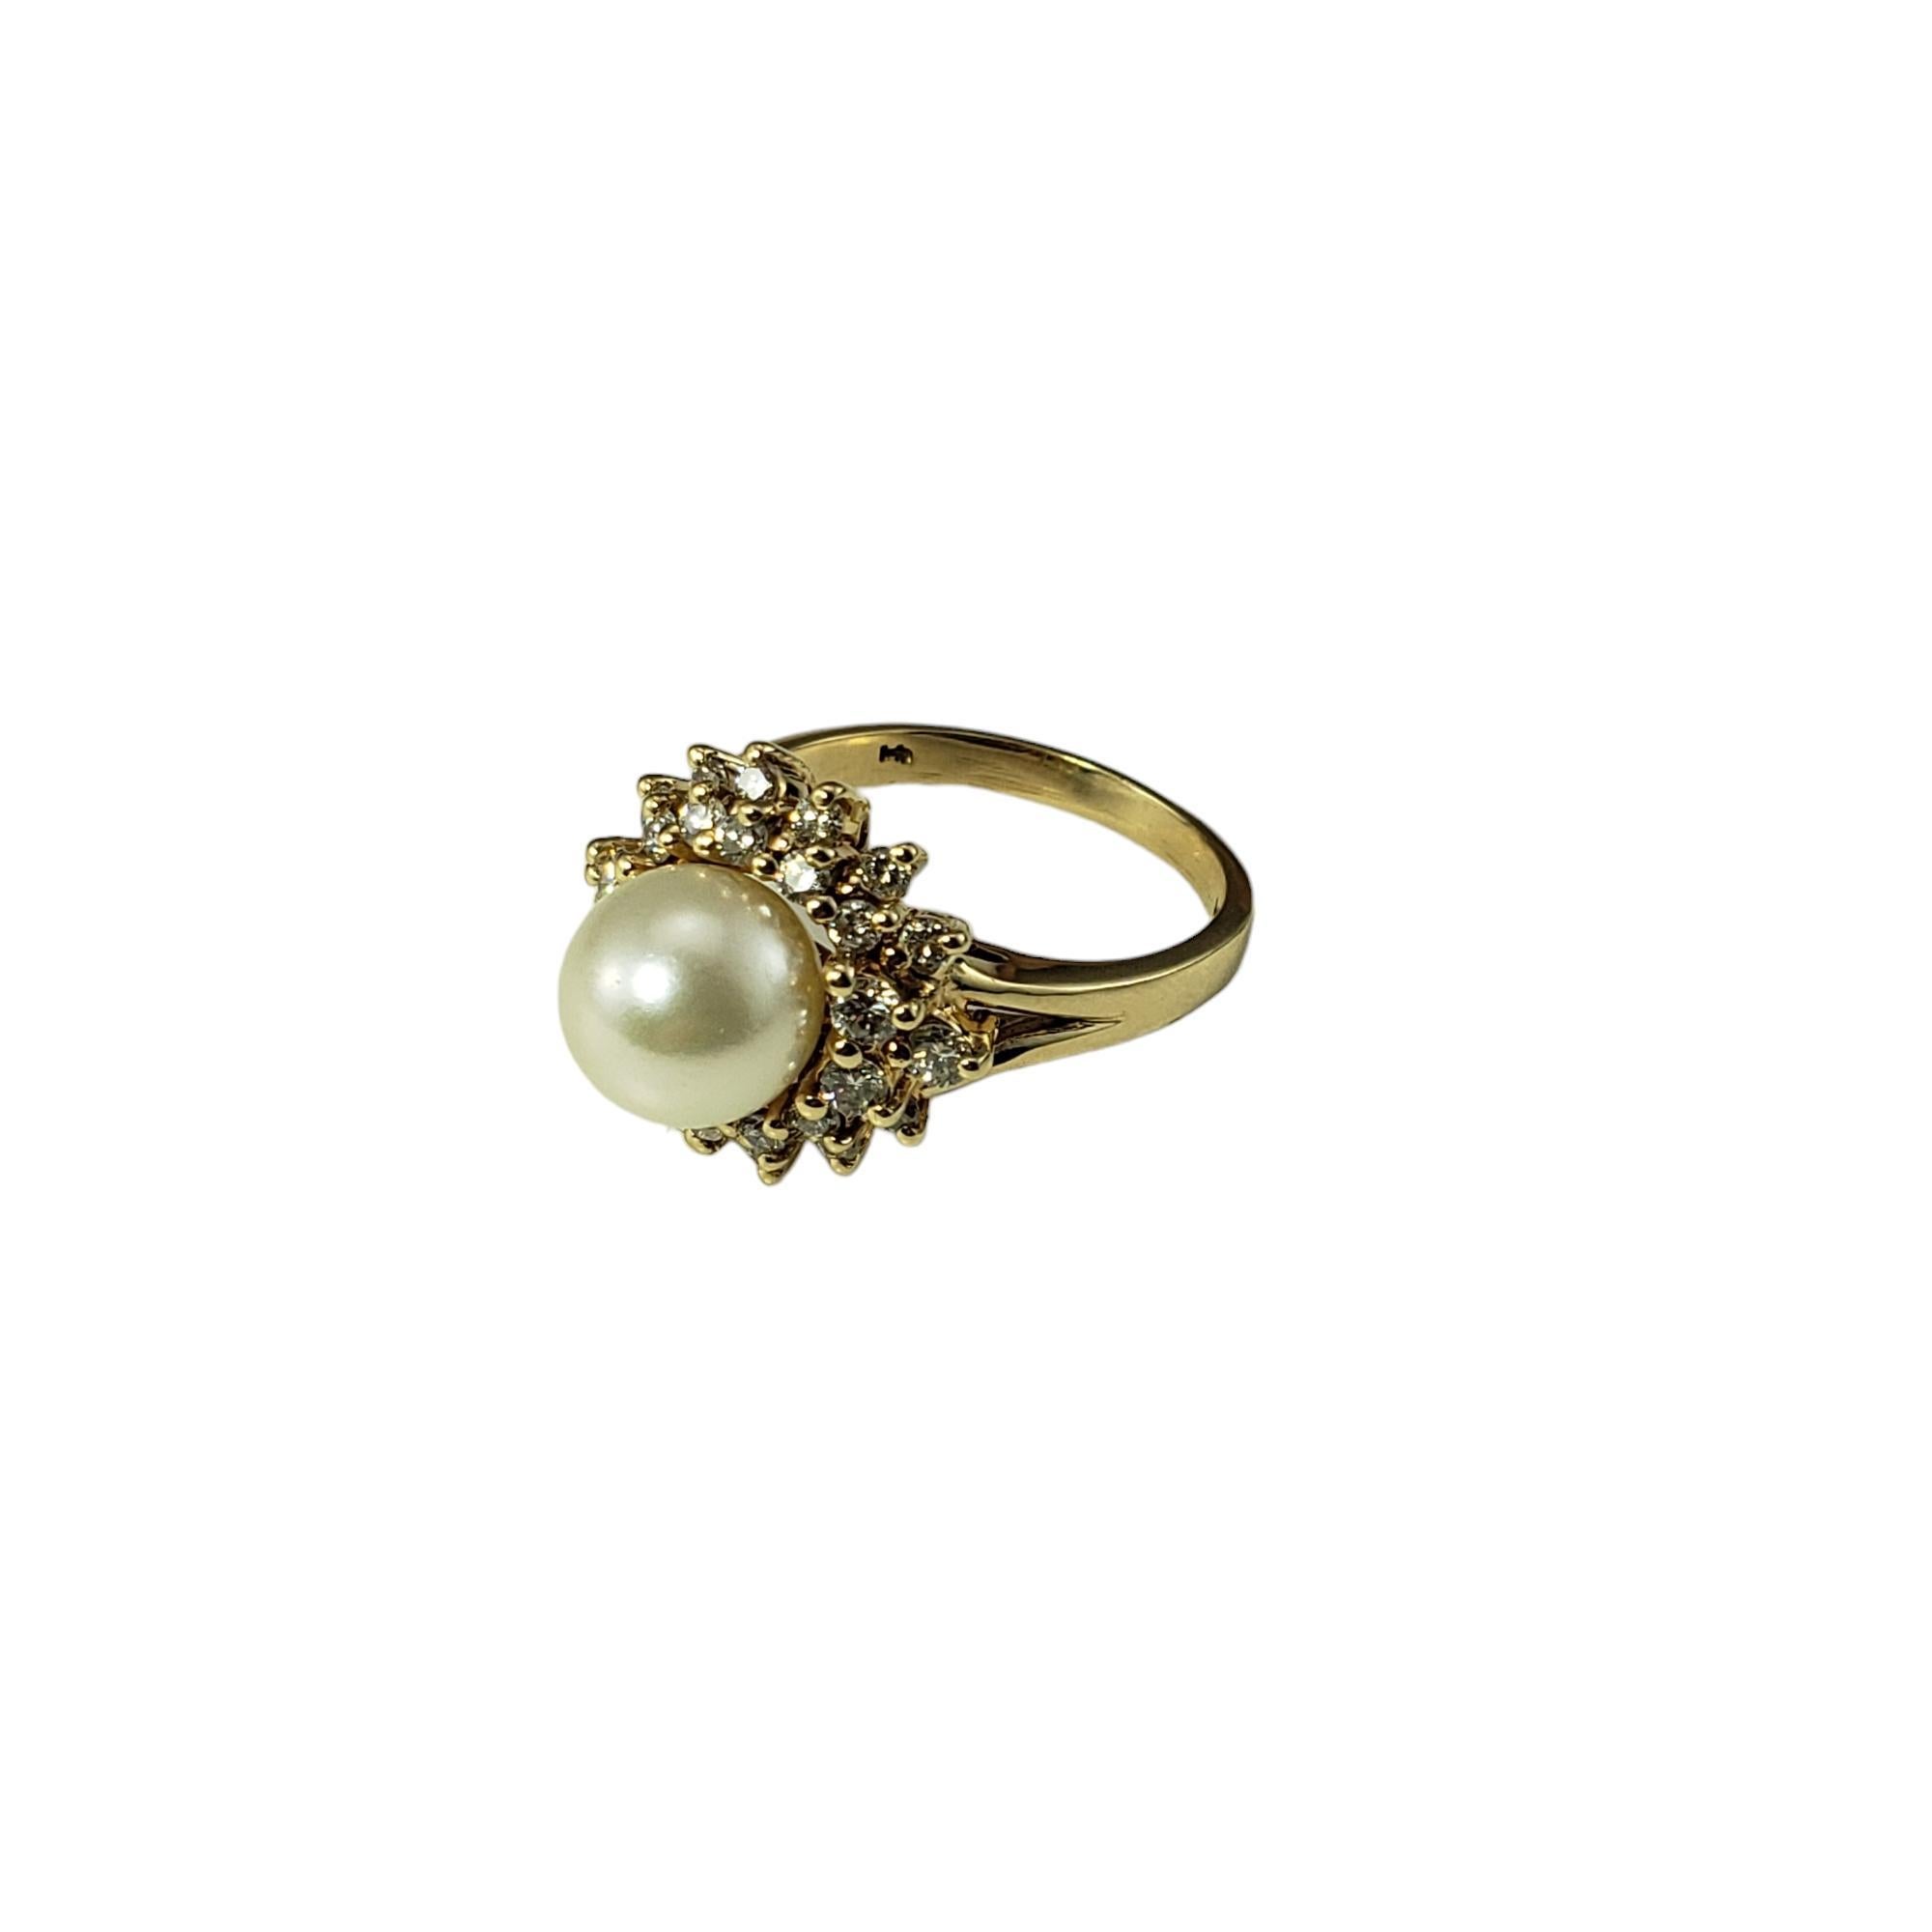 Women's 14 Karat Yellow Gold Pearl and Diamond Ring Size 7.5 #16651 For Sale